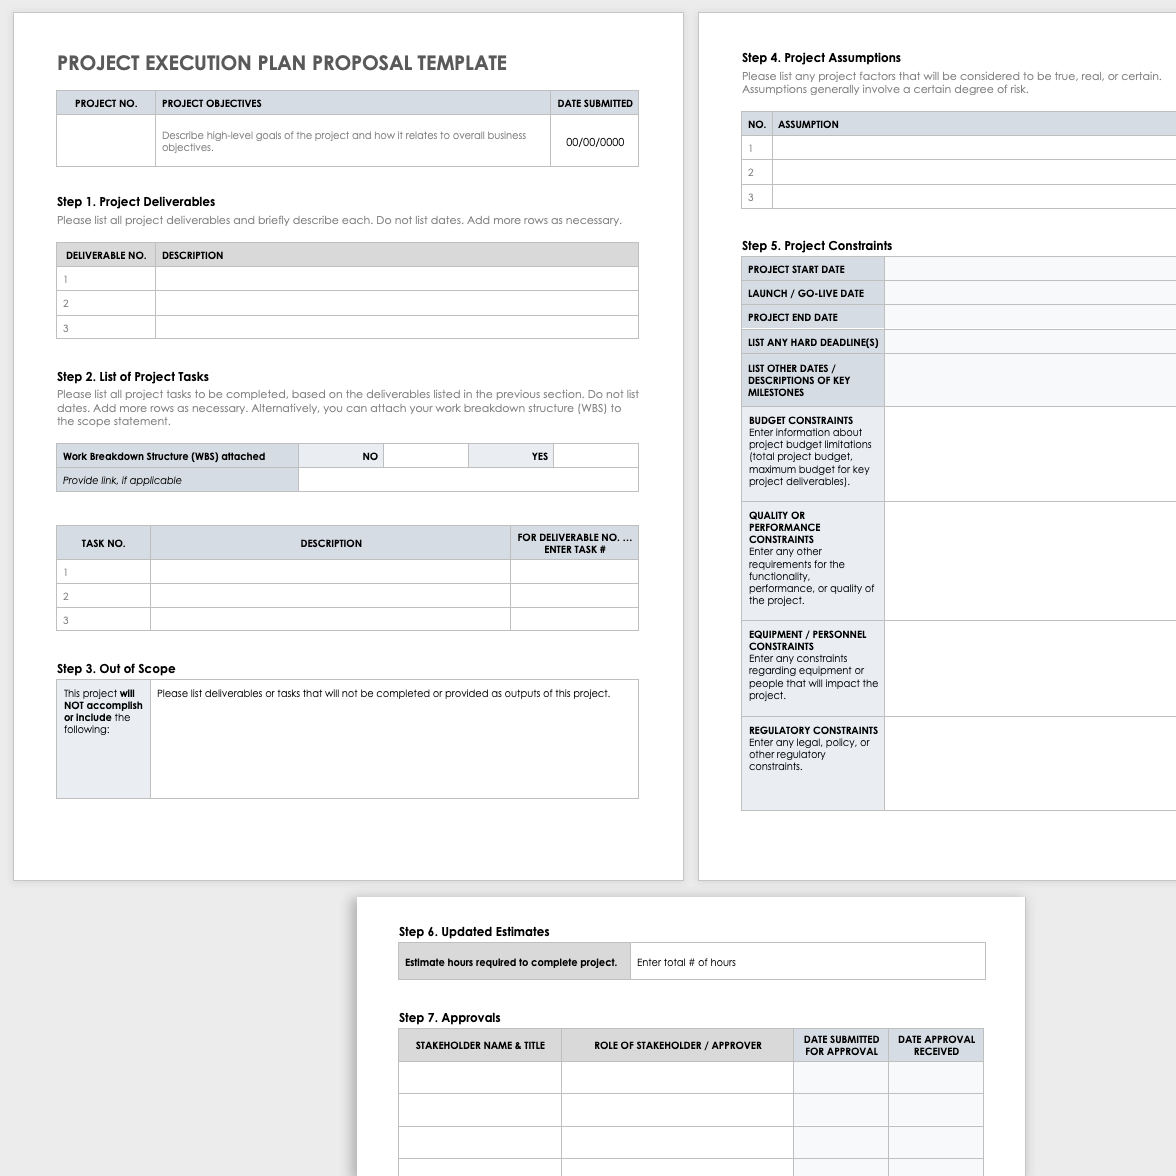 Project Execution Plan Proposal Template